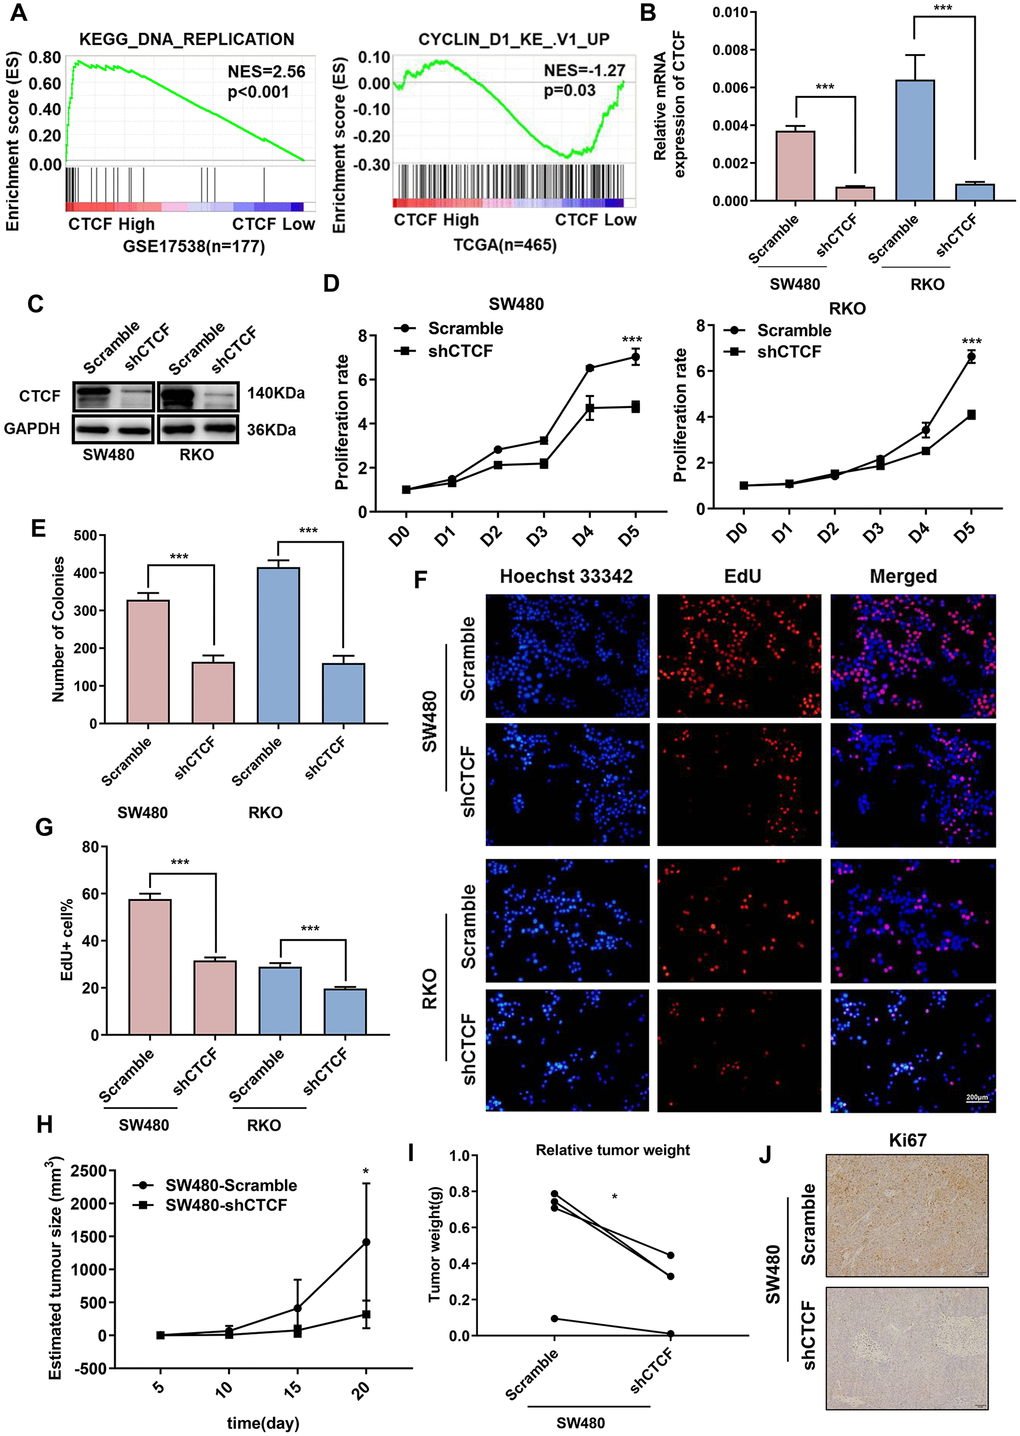 Inhibition of CTCF represses human CRC cells proliferation. (A) GSEA results showed that “KEGG